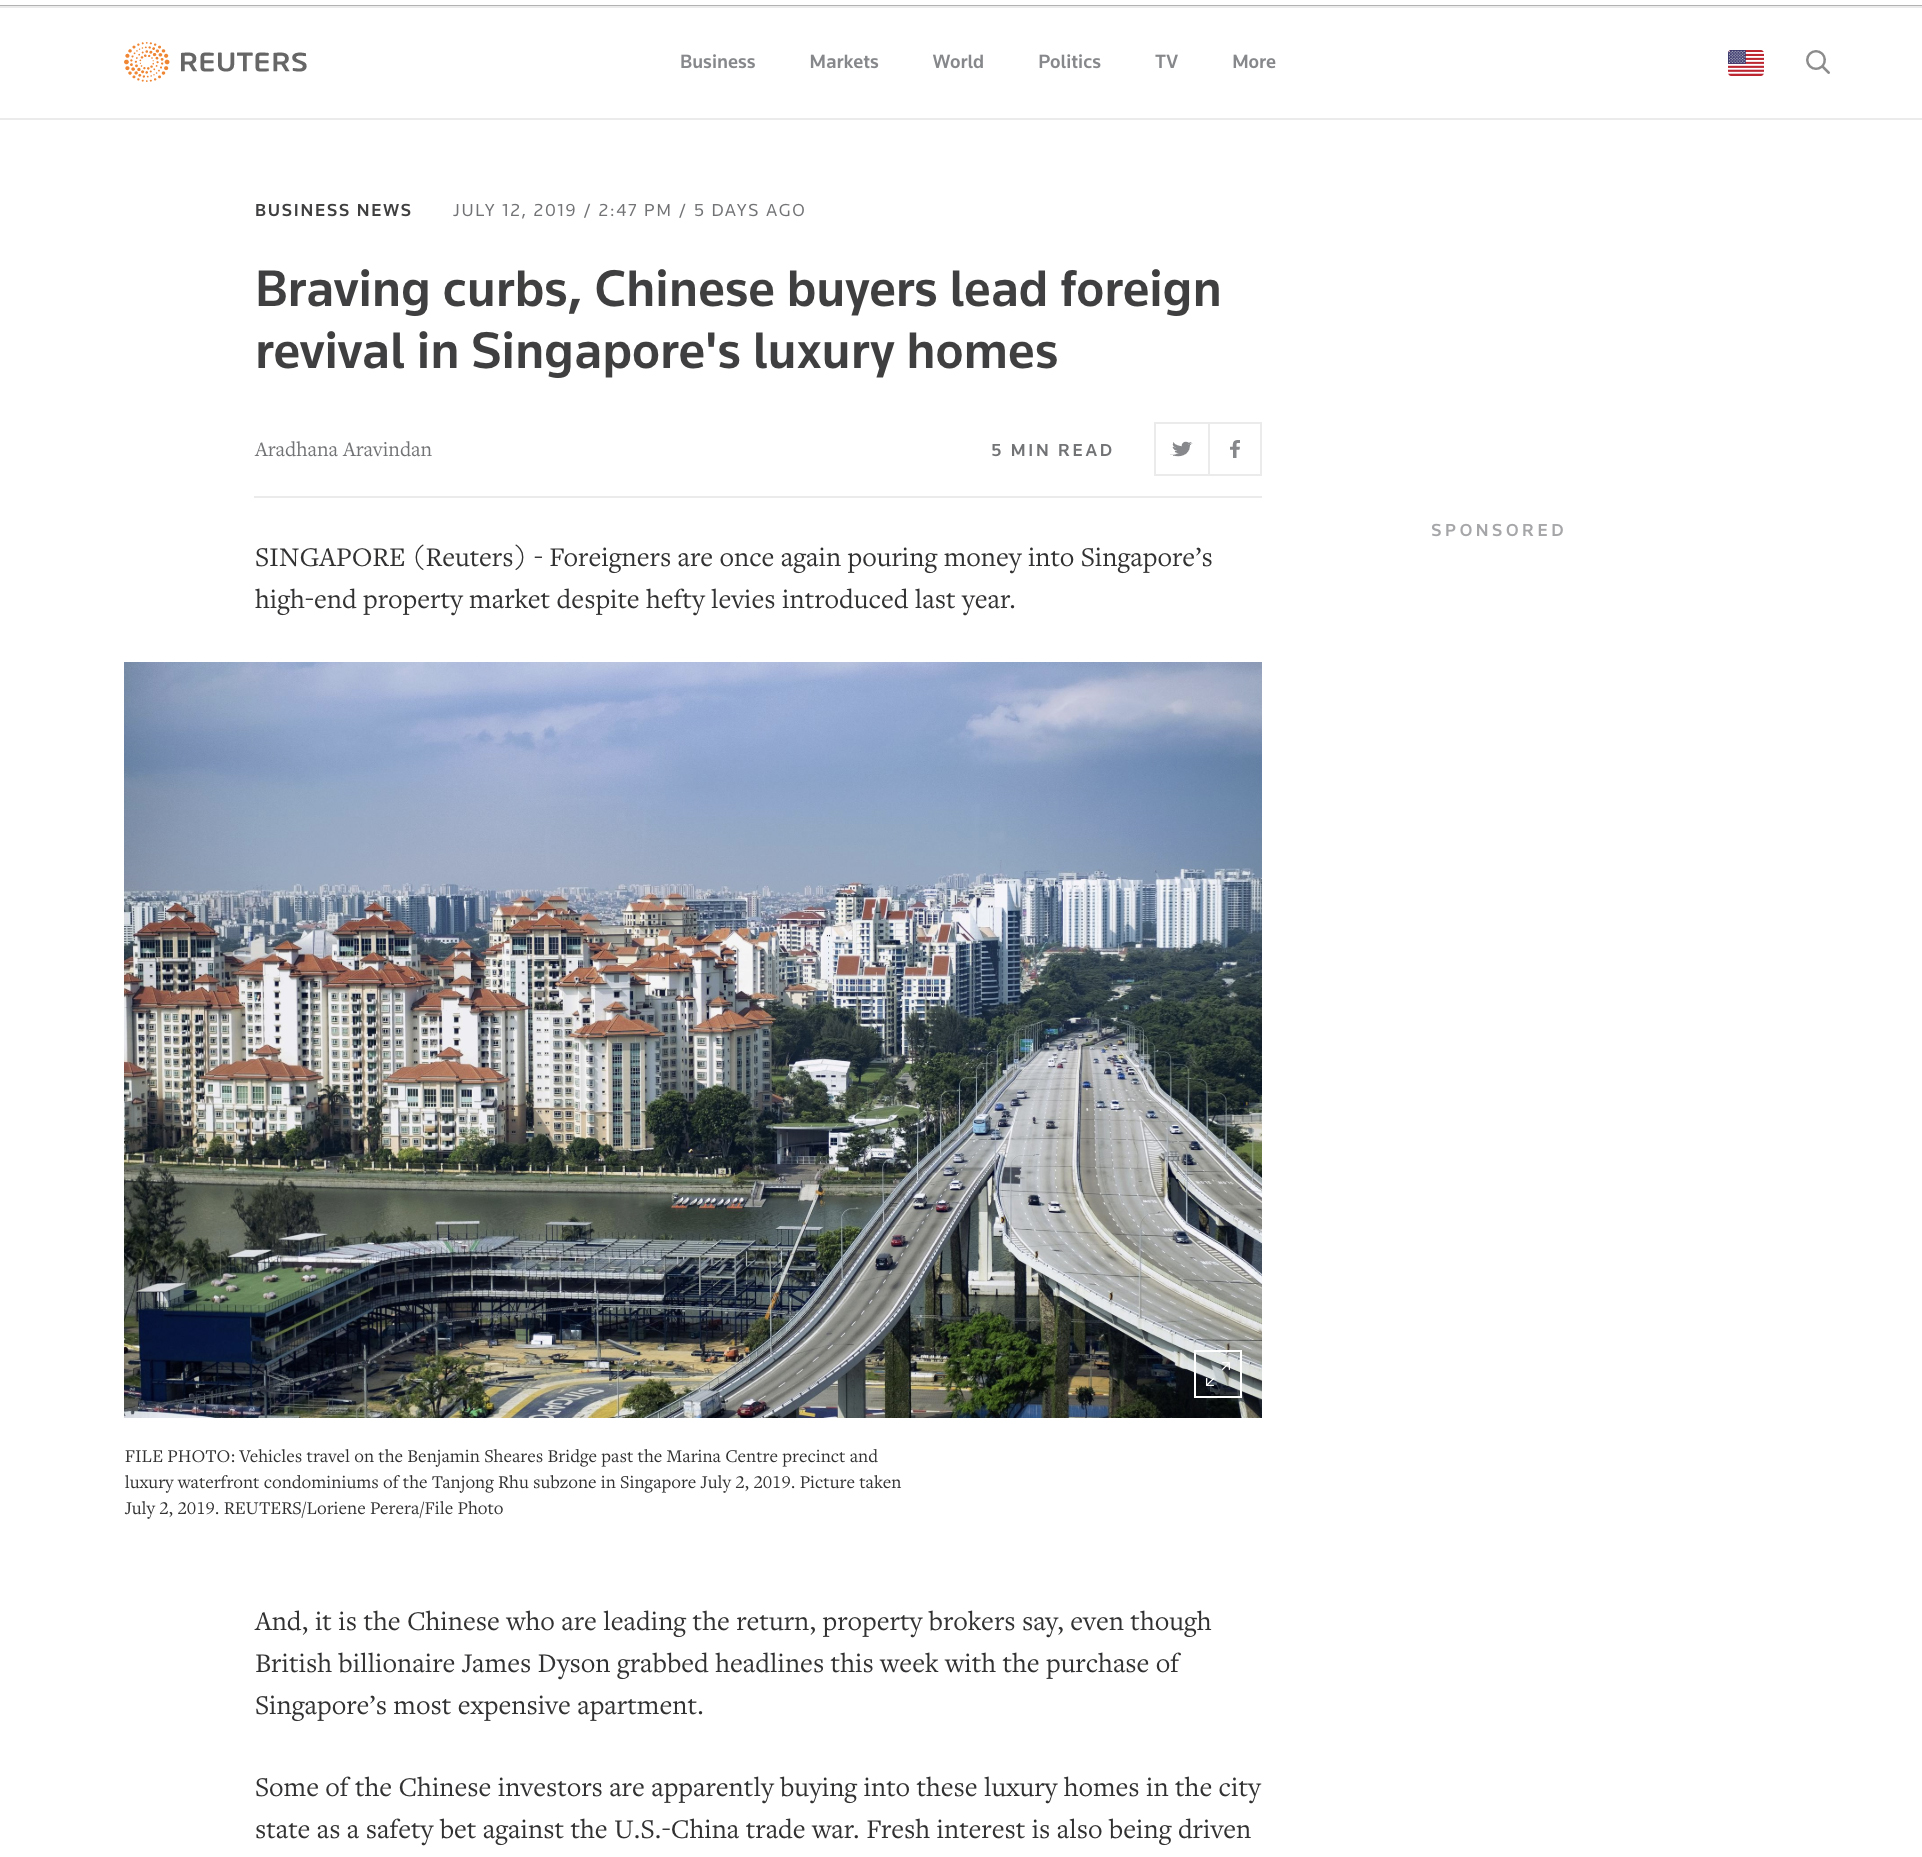 reuters dot com - chinese buyers lead foreign revival in SG luxury homes.jpg